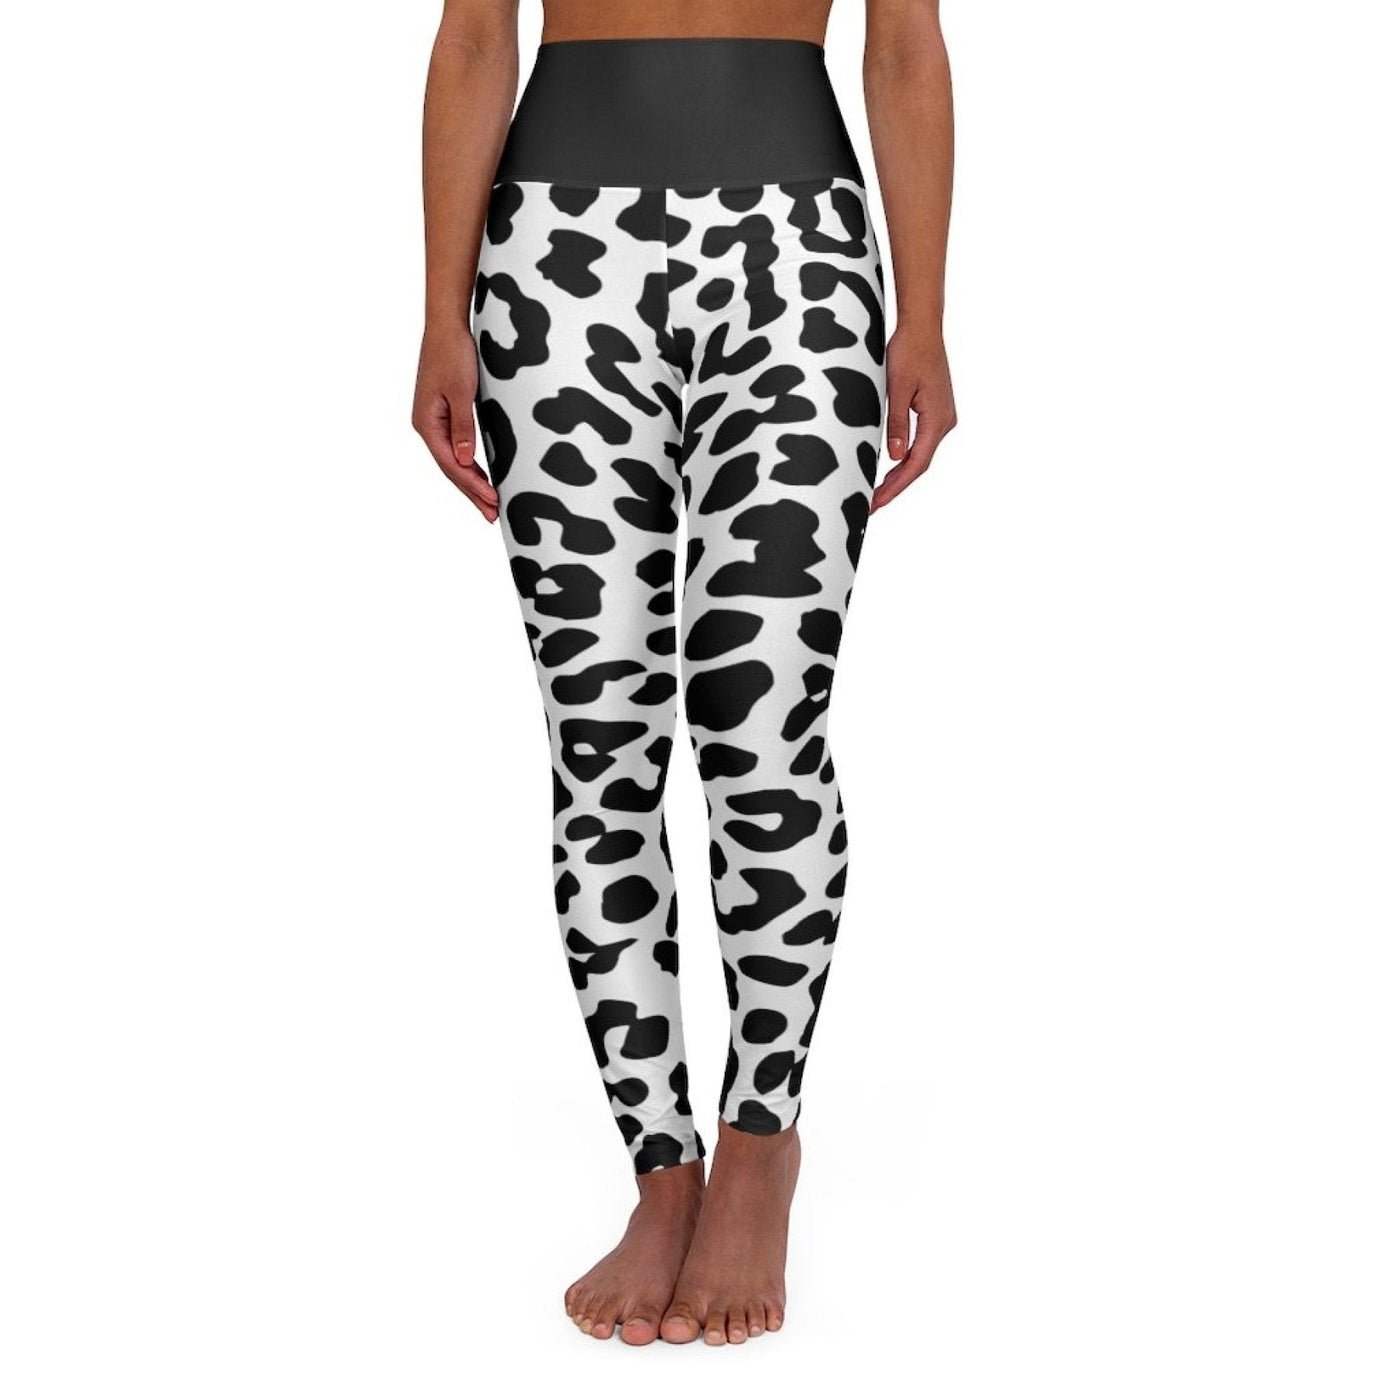 High Waisted Yoga Leggings Black And White Two-tone Leopard Style Pants - Womens